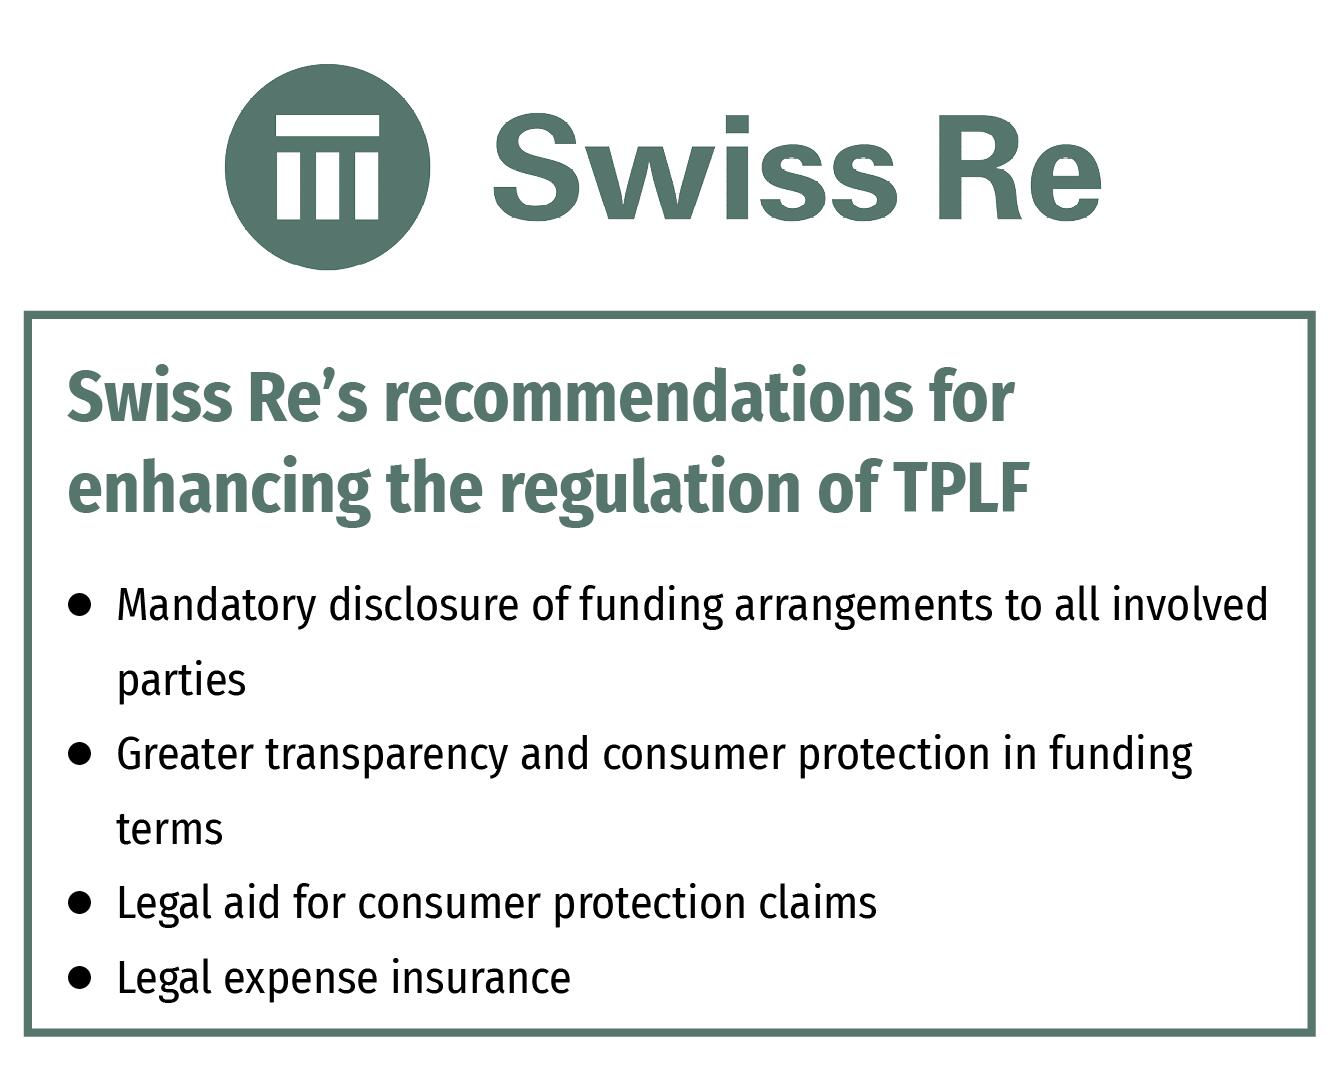 Swiss Re’s recommendations for enhancing the regulation of TPLF